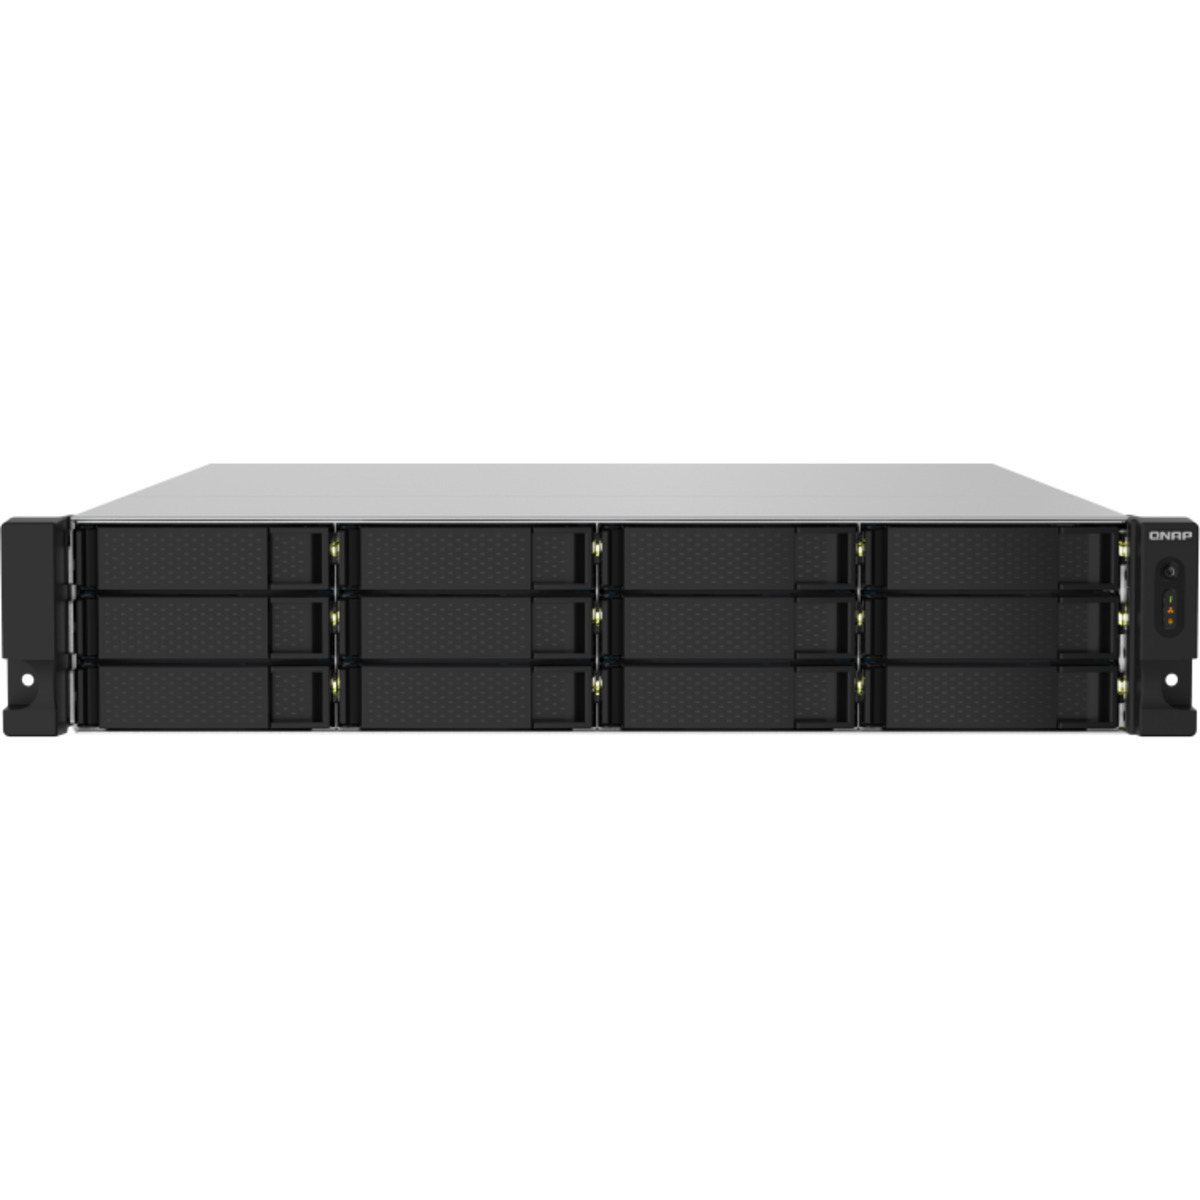 QNAP TS-1232PXU-RP 264tb 12-Bay RackMount Personal / Basic Home / Small Office NAS - Network Attached Storage Device 11x24tb Seagate IronWolf Pro ST24000NT002 3.5 7200rpm SATA 6Gb/s HDD NAS Class Drives Installed - Burn-In Tested - FREE RAM UPGRADE TS-1232PXU-RP